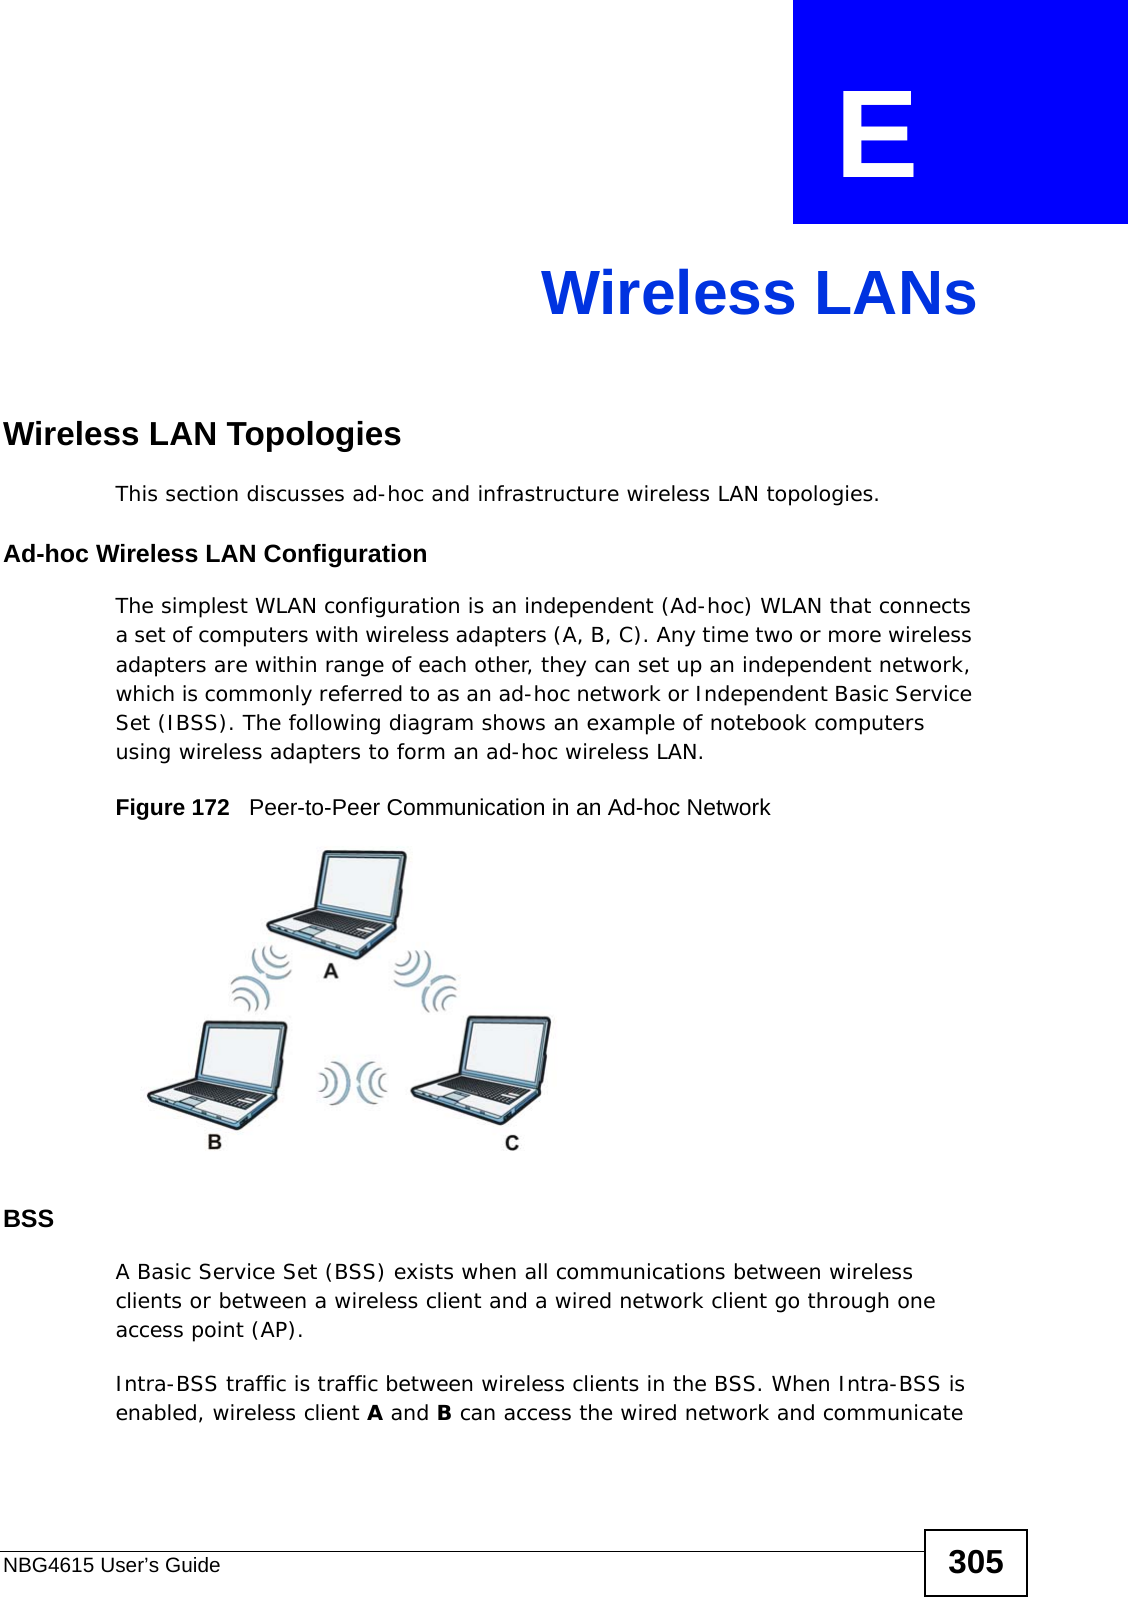 NBG4615 User’s Guide 305APPENDIX  E Wireless LANsWireless LAN TopologiesThis section discusses ad-hoc and infrastructure wireless LAN topologies.Ad-hoc Wireless LAN ConfigurationThe simplest WLAN configuration is an independent (Ad-hoc) WLAN that connects a set of computers with wireless adapters (A, B, C). Any time two or more wireless adapters are within range of each other, they can set up an independent network, which is commonly referred to as an ad-hoc network or Independent Basic Service Set (IBSS). The following diagram shows an example of notebook computers using wireless adapters to form an ad-hoc wireless LAN. Figure 172   Peer-to-Peer Communication in an Ad-hoc NetworkBSSA Basic Service Set (BSS) exists when all communications between wireless clients or between a wireless client and a wired network client go through one access point (AP). Intra-BSS traffic is traffic between wireless clients in the BSS. When Intra-BSS is enabled, wireless client A and B can access the wired network and communicate 